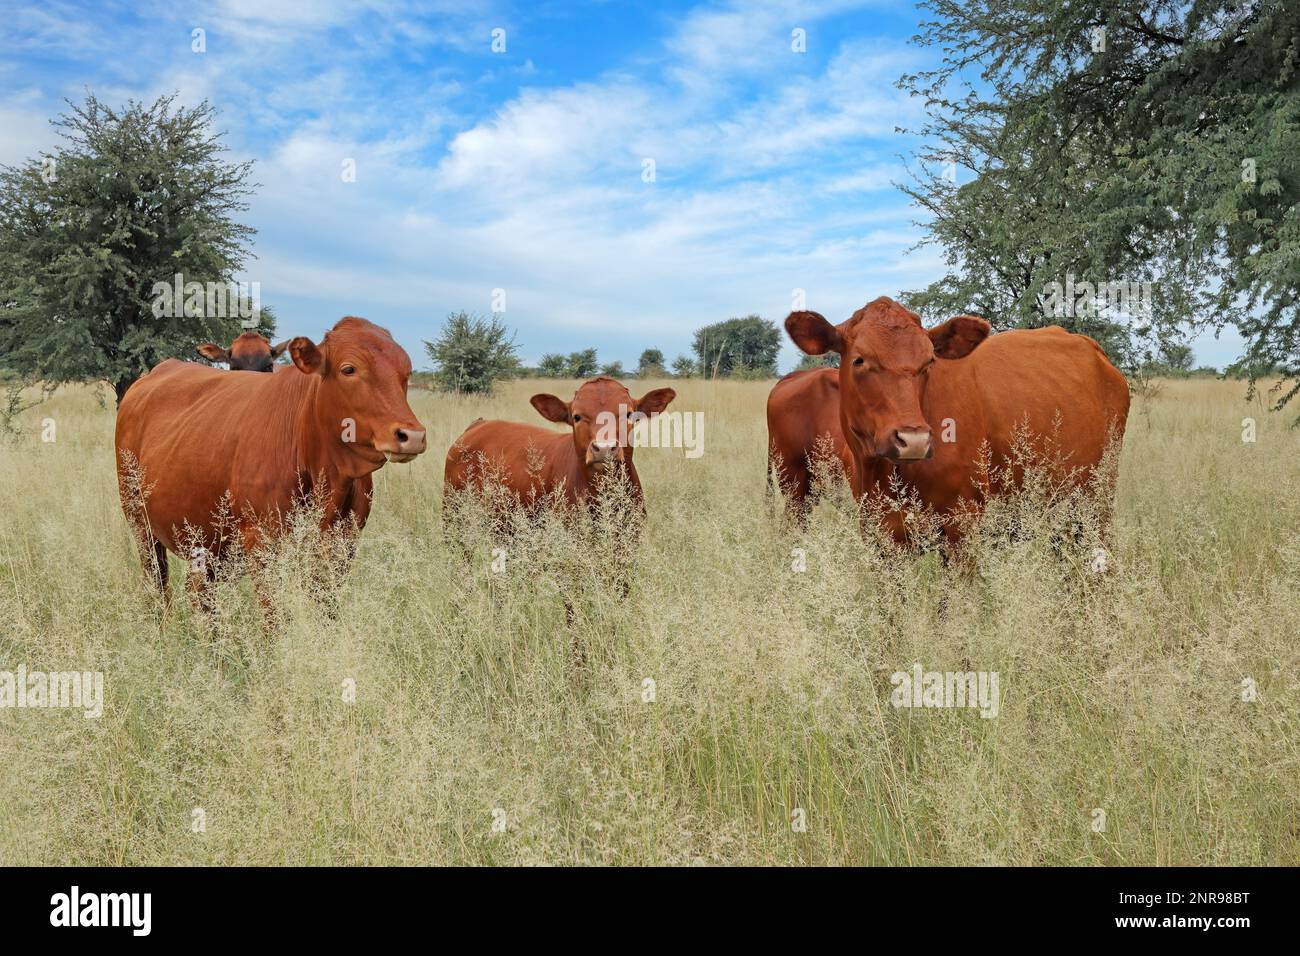 Free-range cows in native grassland on a rural farm, South Africa Stock Photo